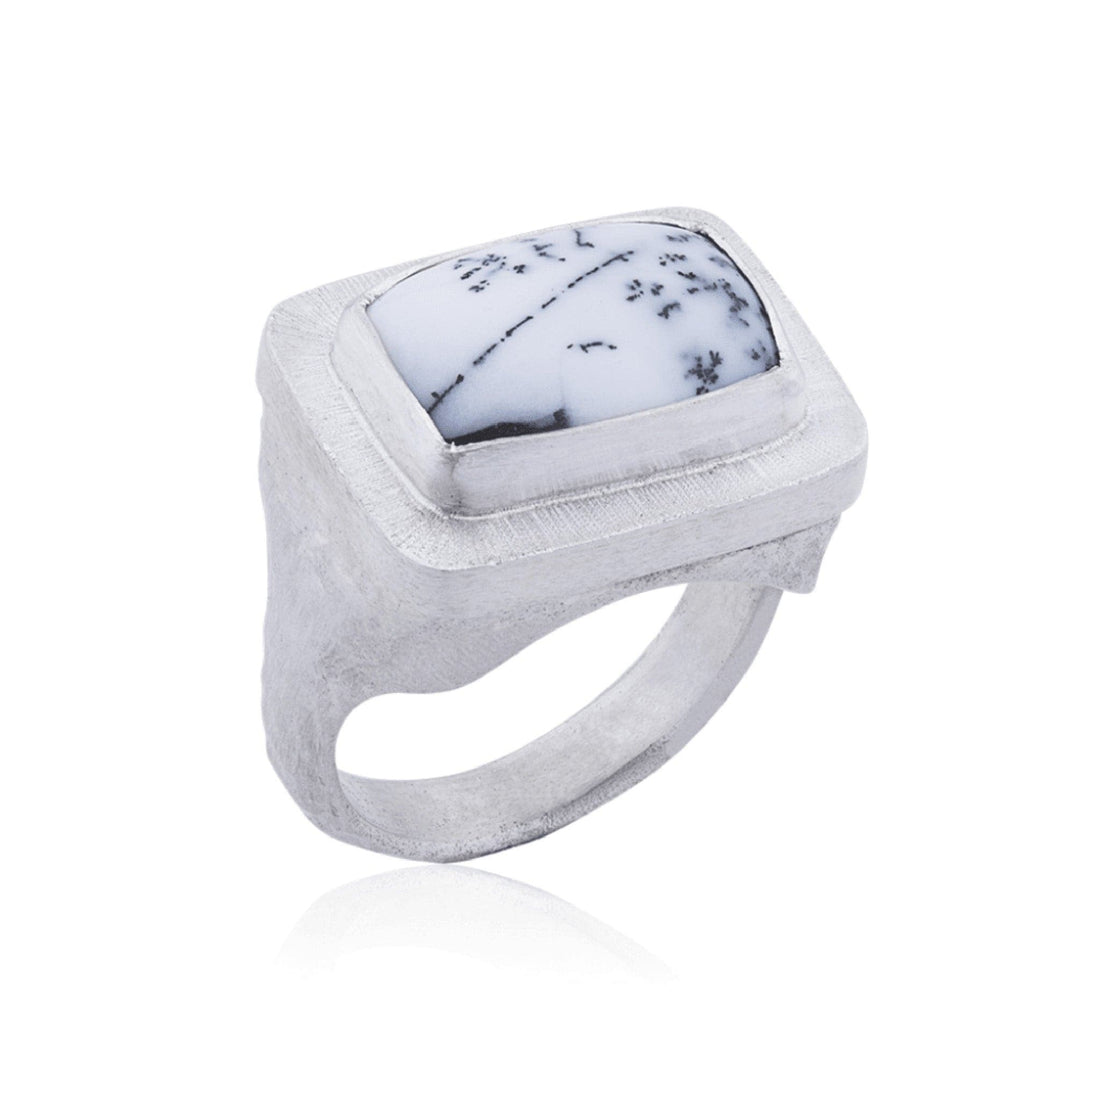 Dendritic Agate Pompei Sterling Silver Ring by Lika Behar